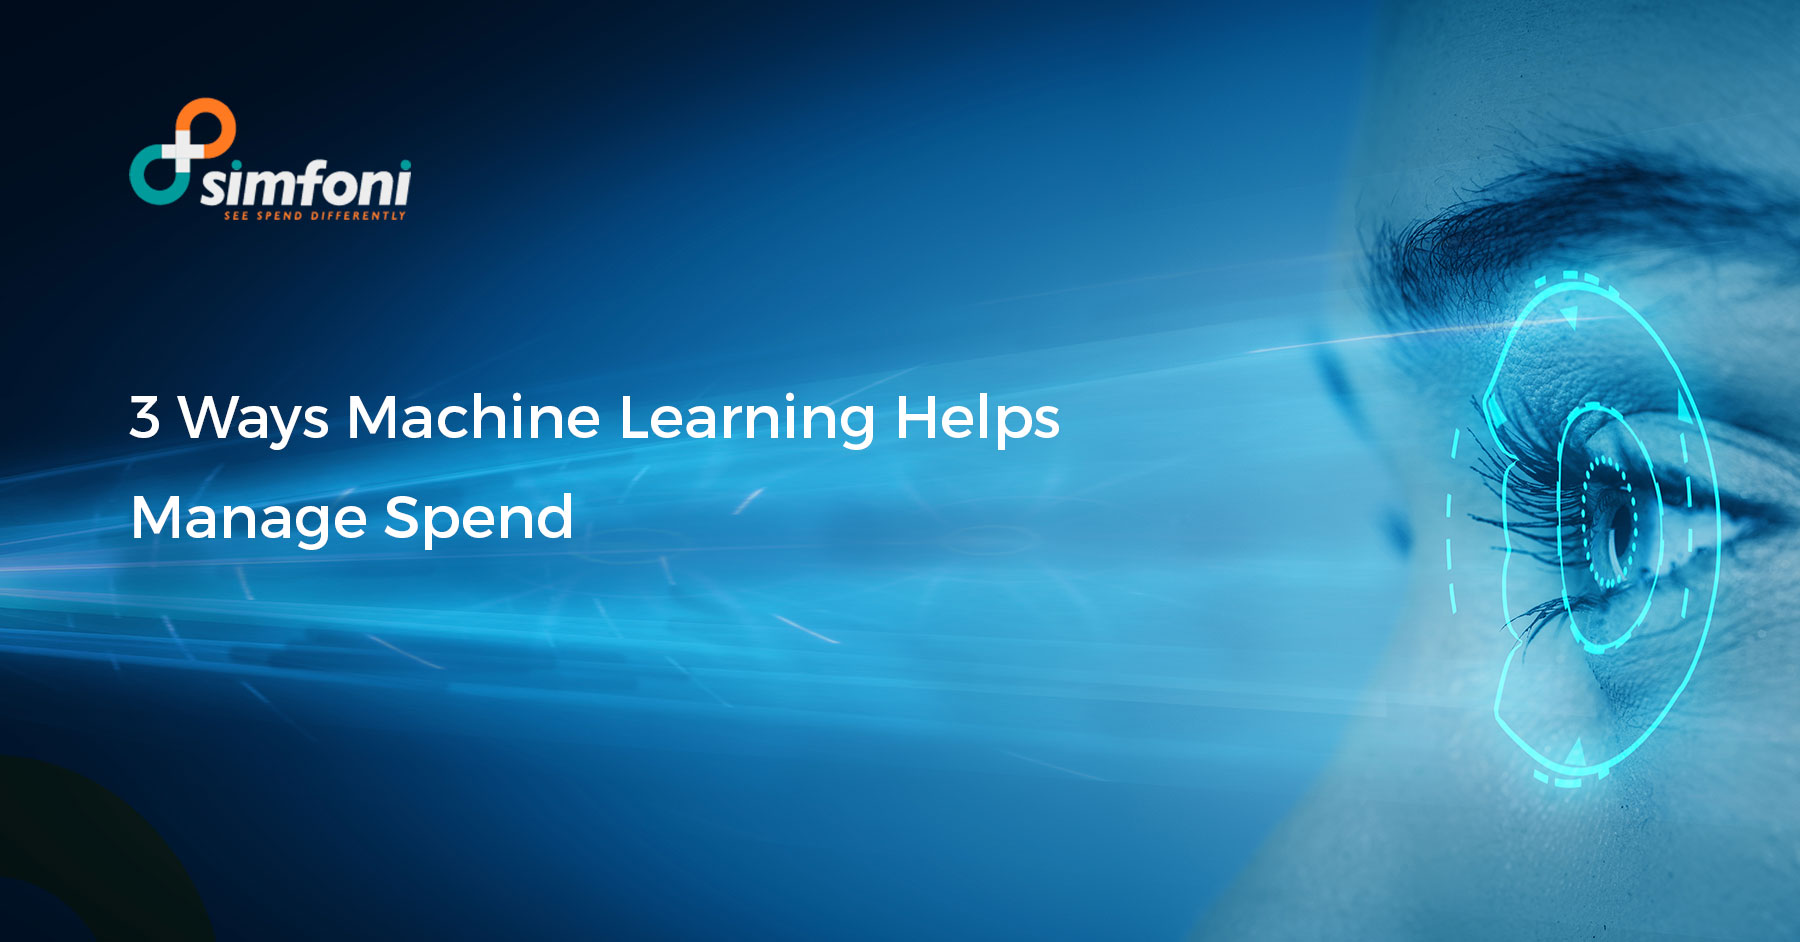 3 Ways Machine Learning Helps Manage Spend